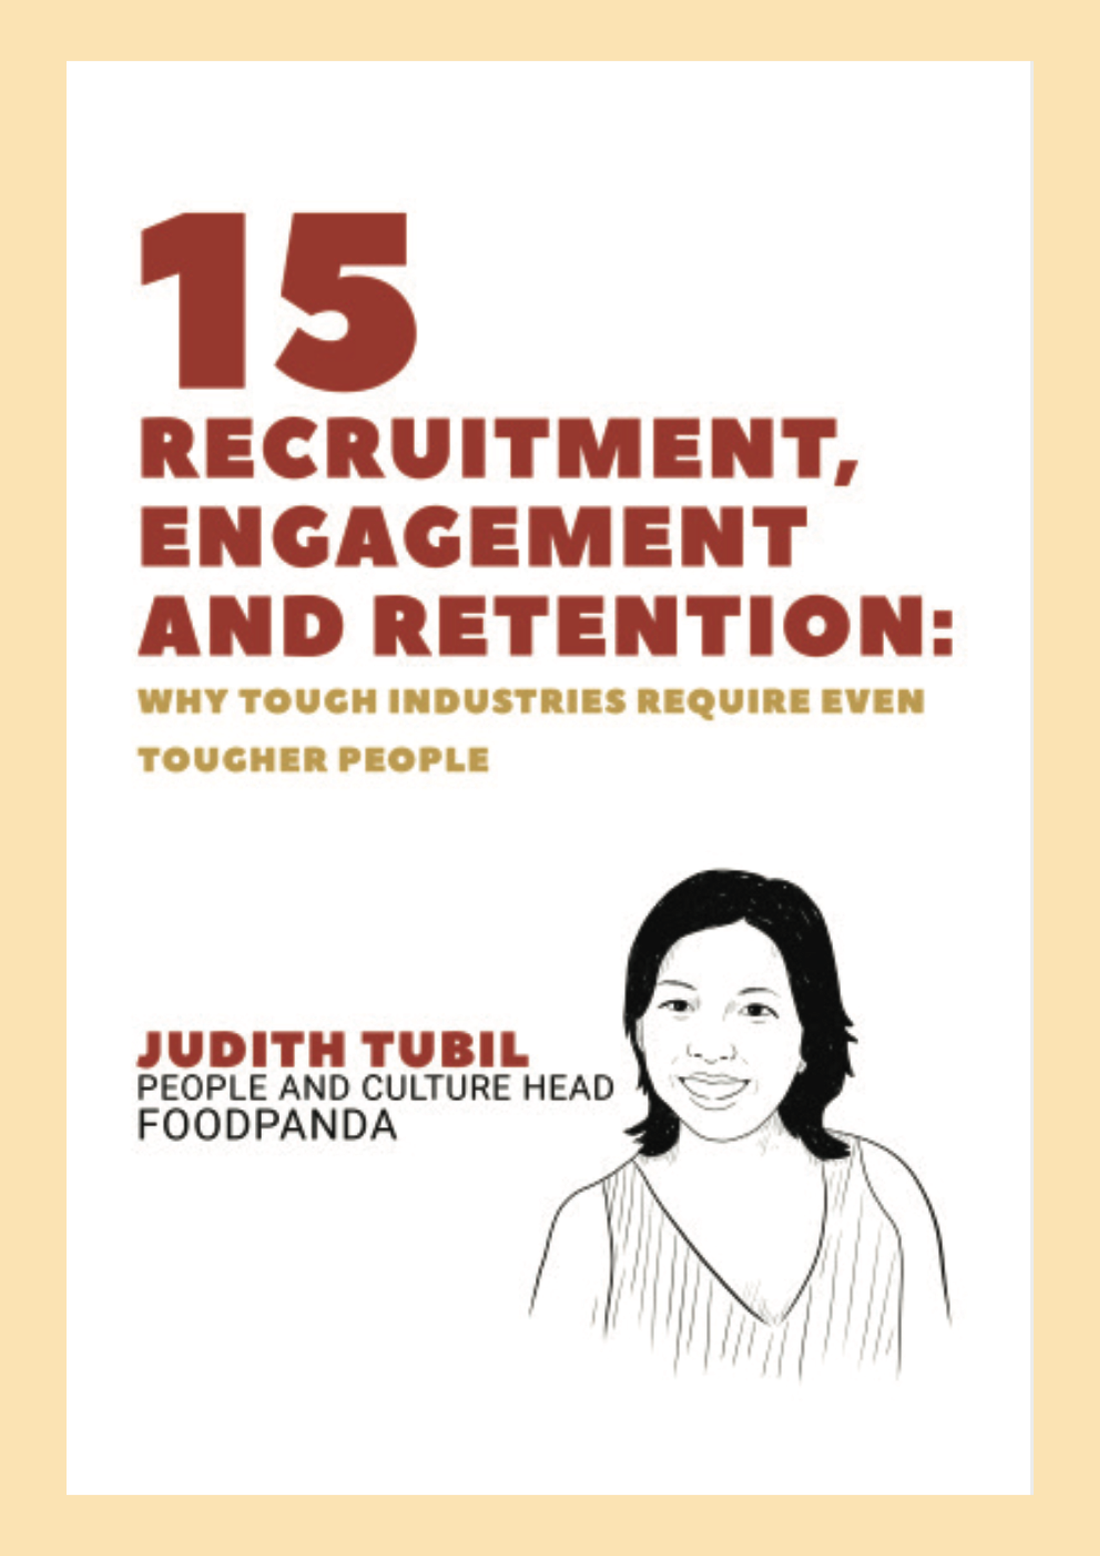 Recruitment, Engagement and Retention: Why Tough Industries Require Even Tougher People